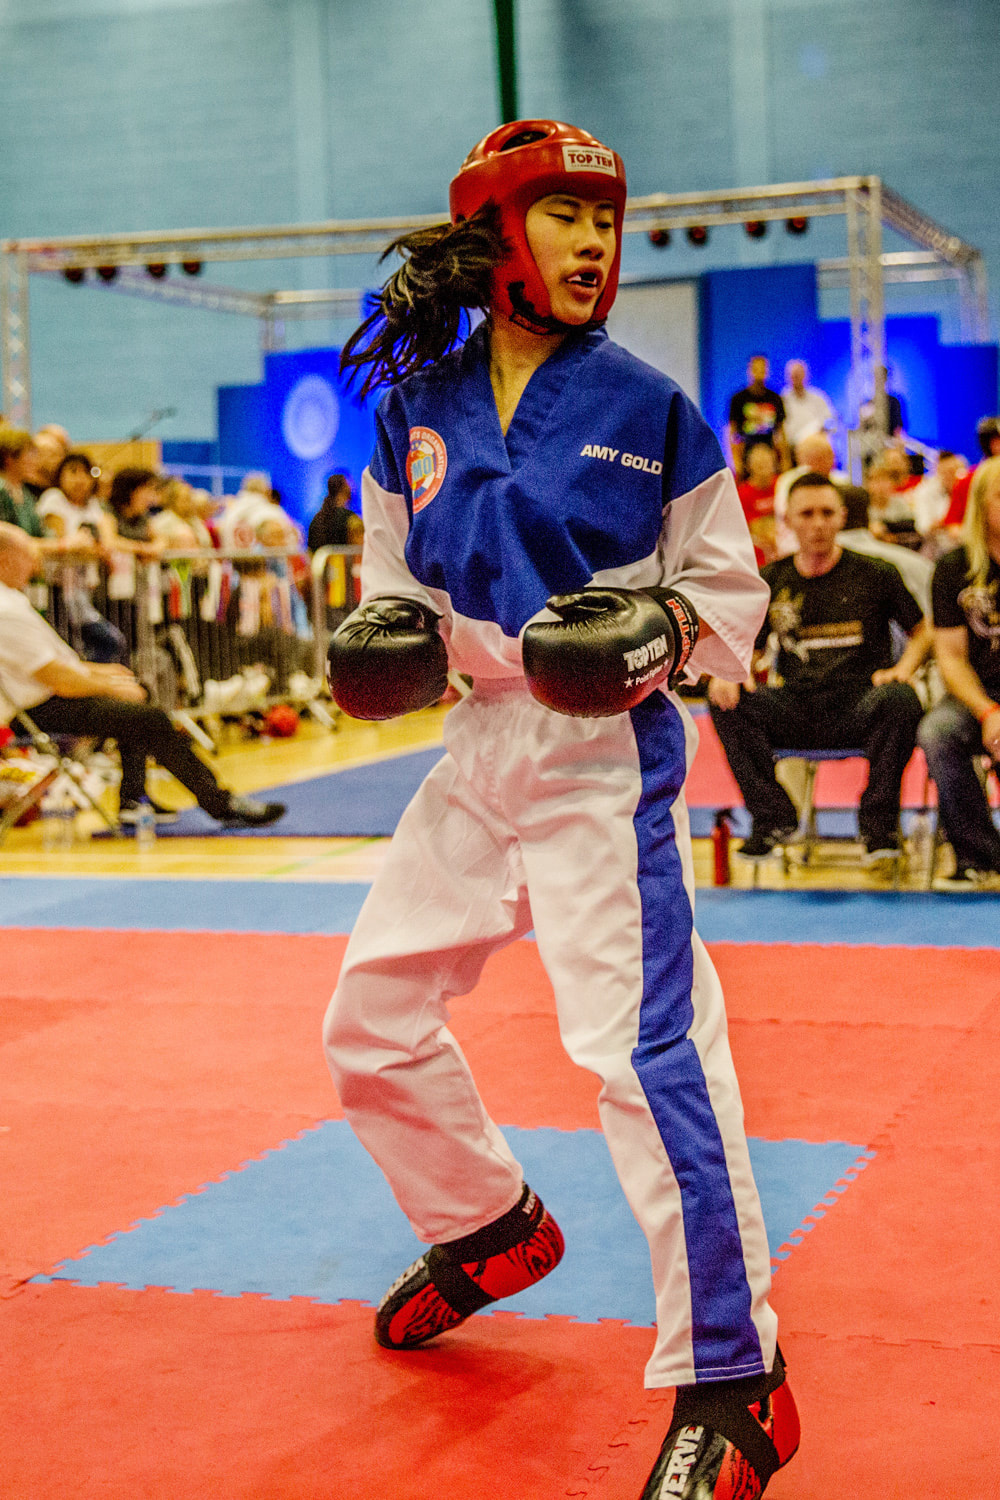 Amy Golder action shot from WMO World CHampionships held in Rugby, England 2015 where she won 3 Golds